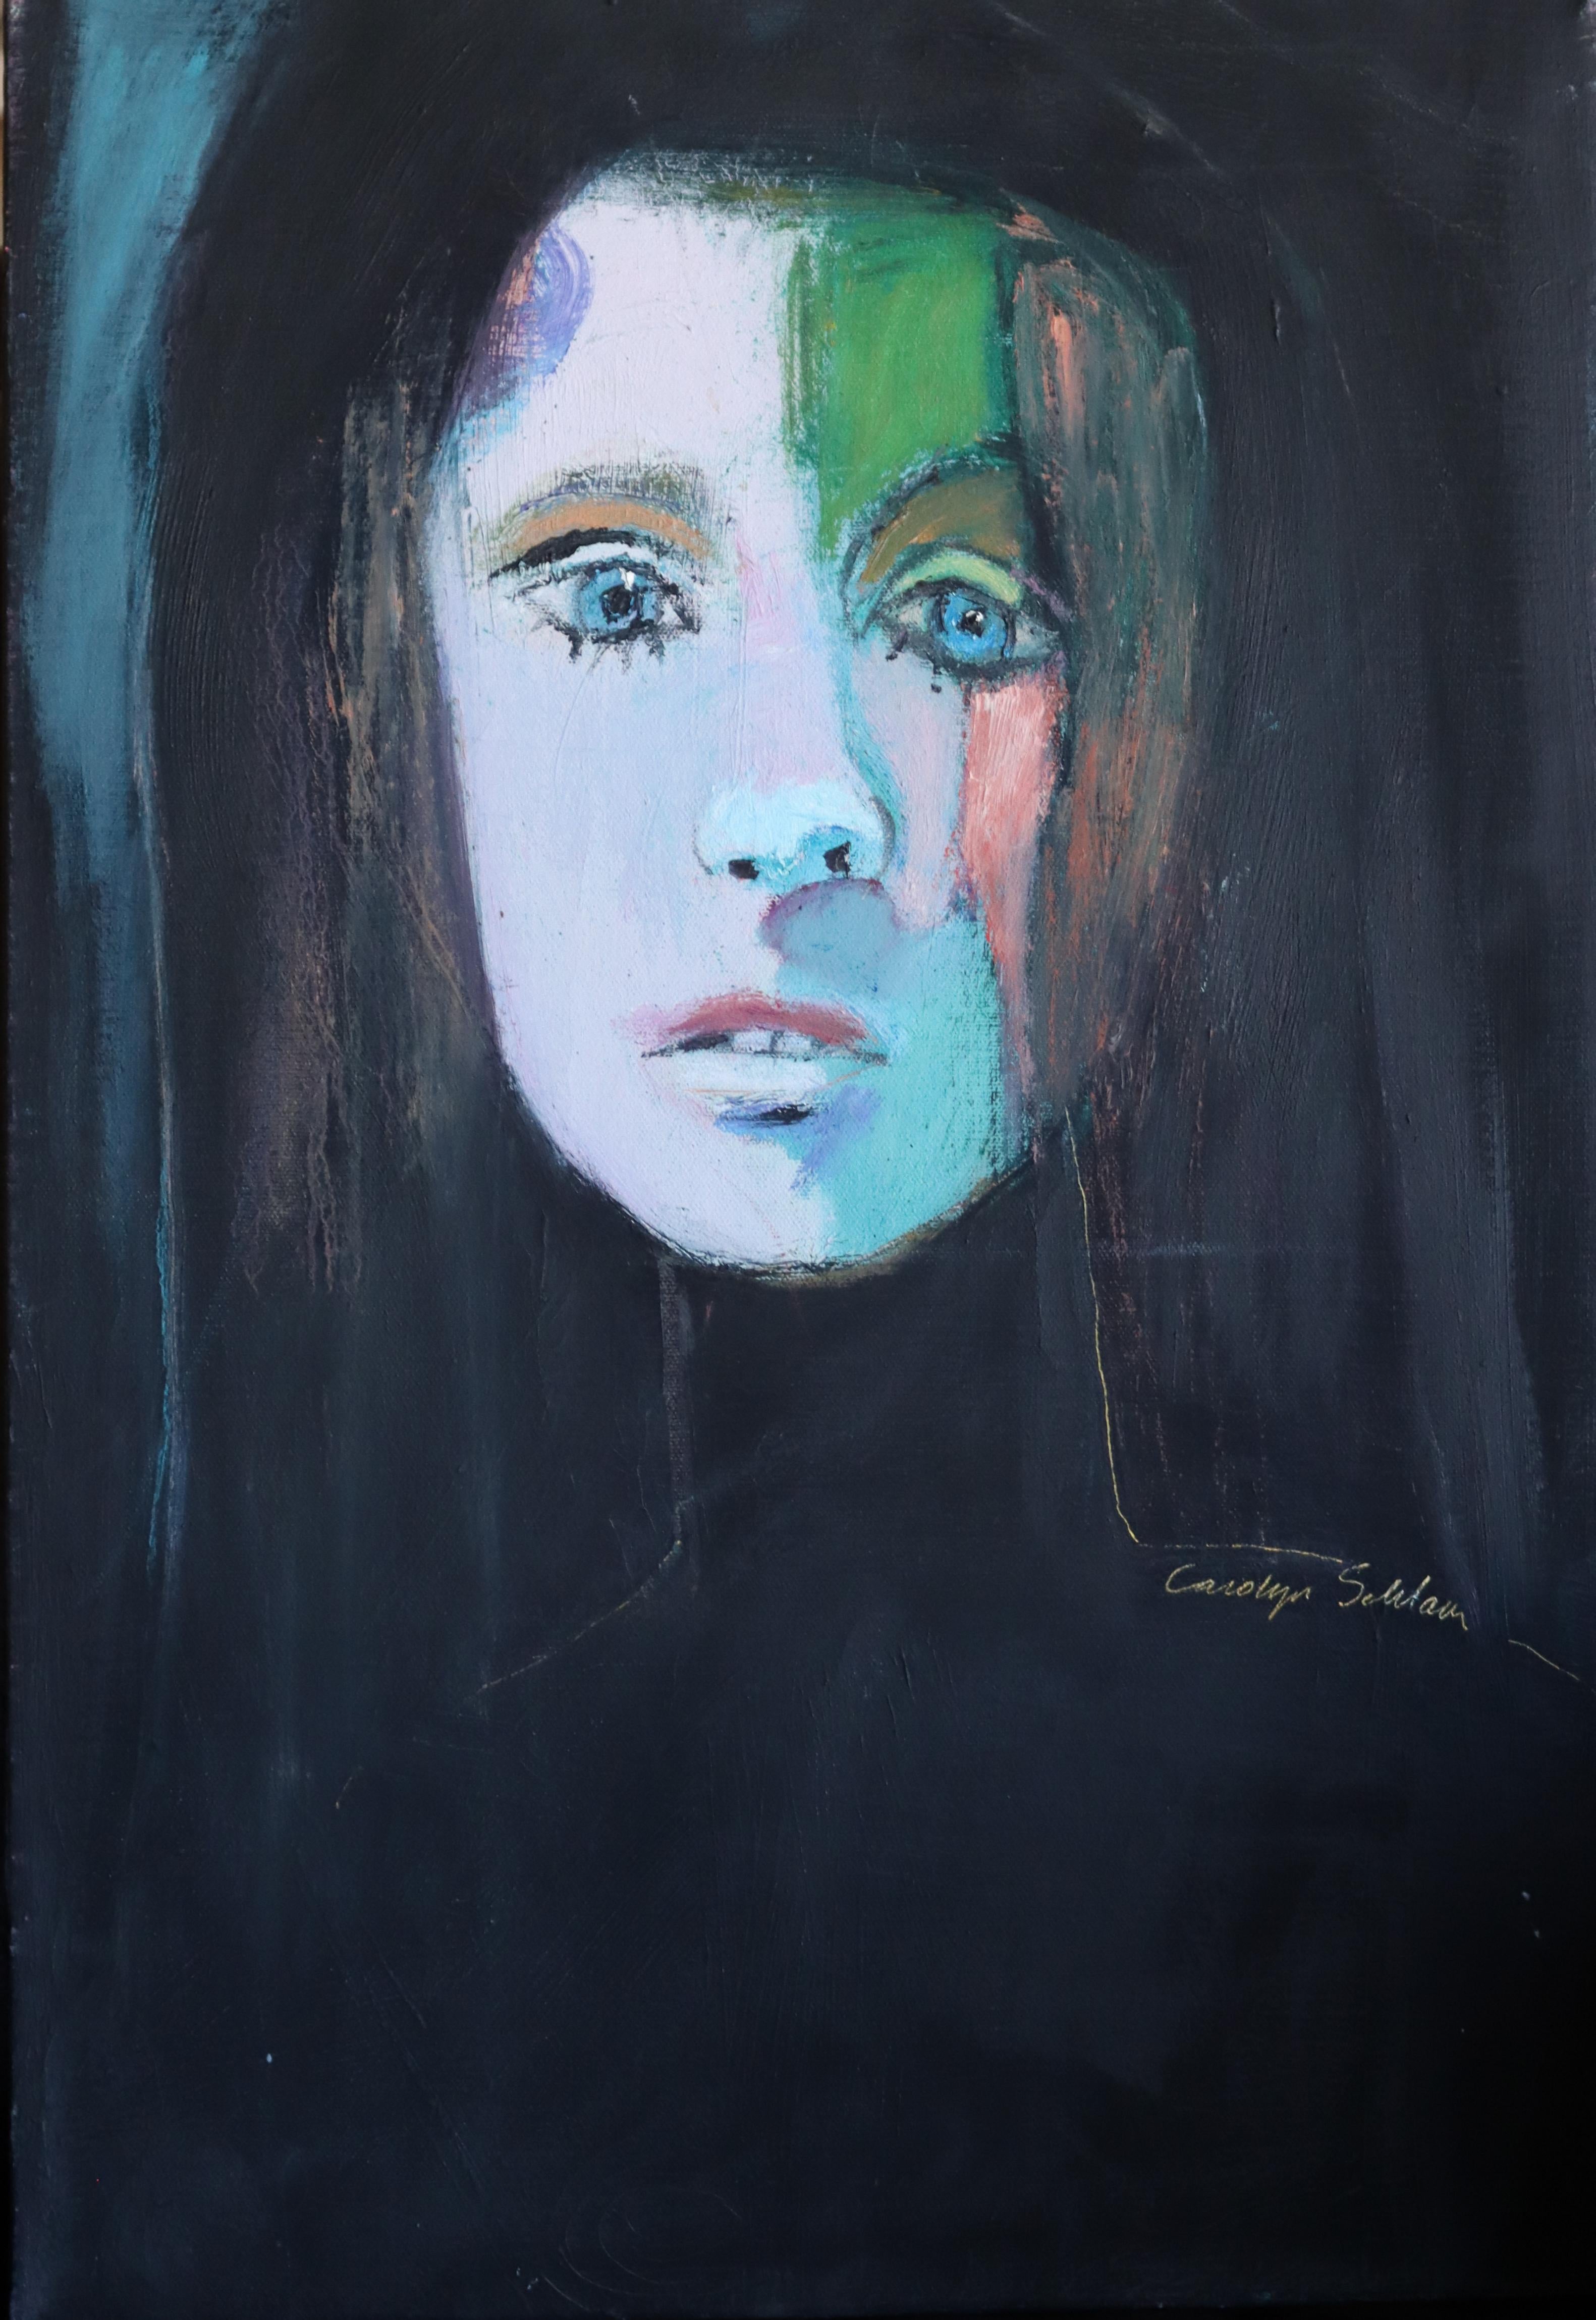 Portrait Painting Carolyn Schlam - Ghost Girl